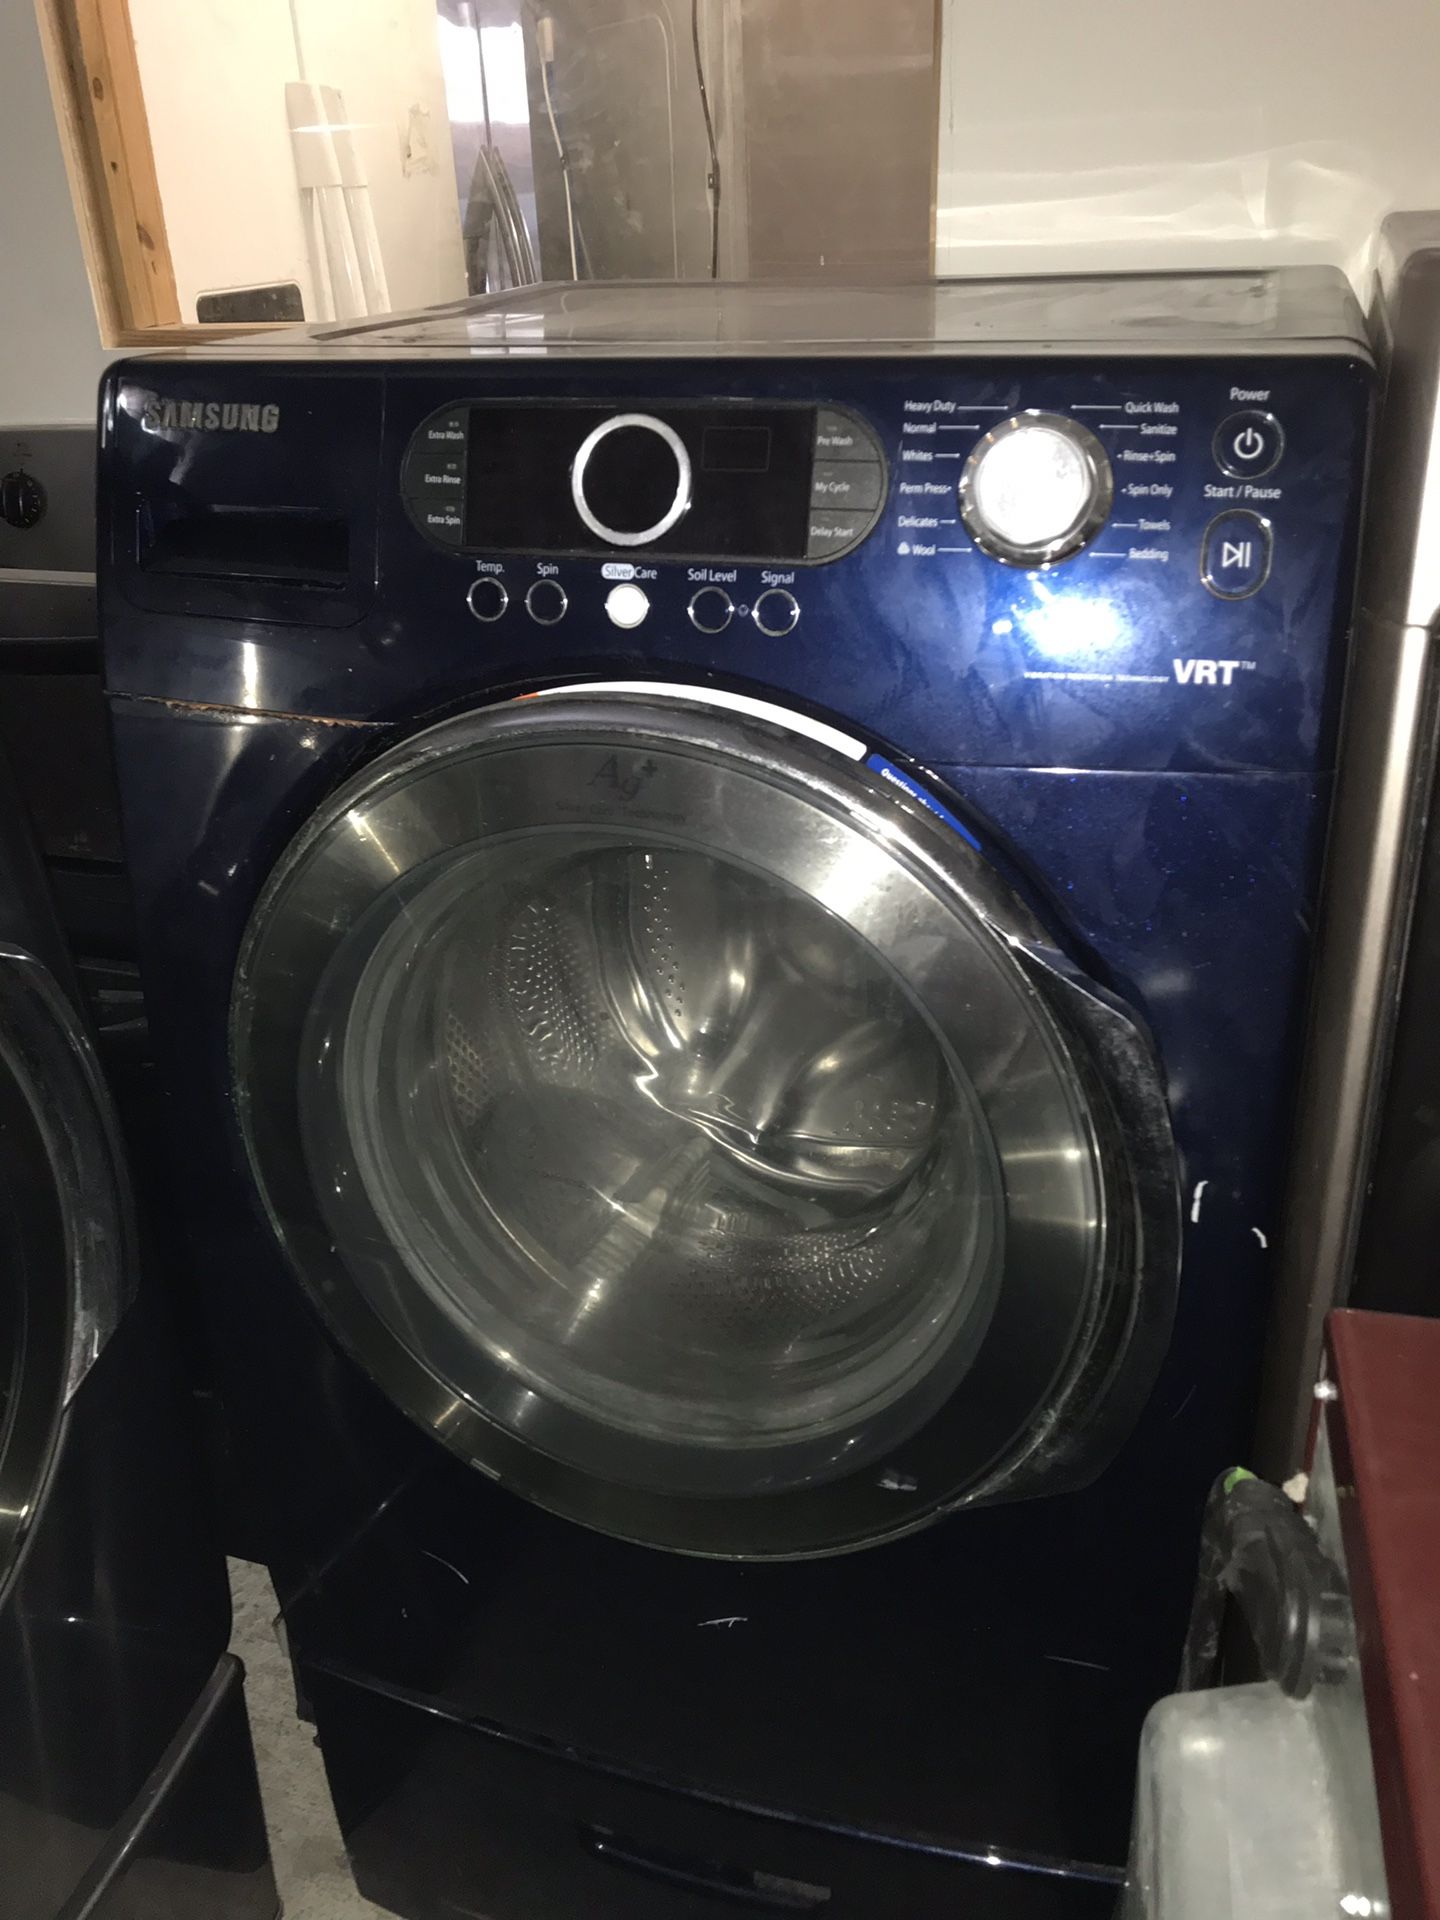 Samsung Front Load Washer With VRT WE HAVE DELIVERY !!!